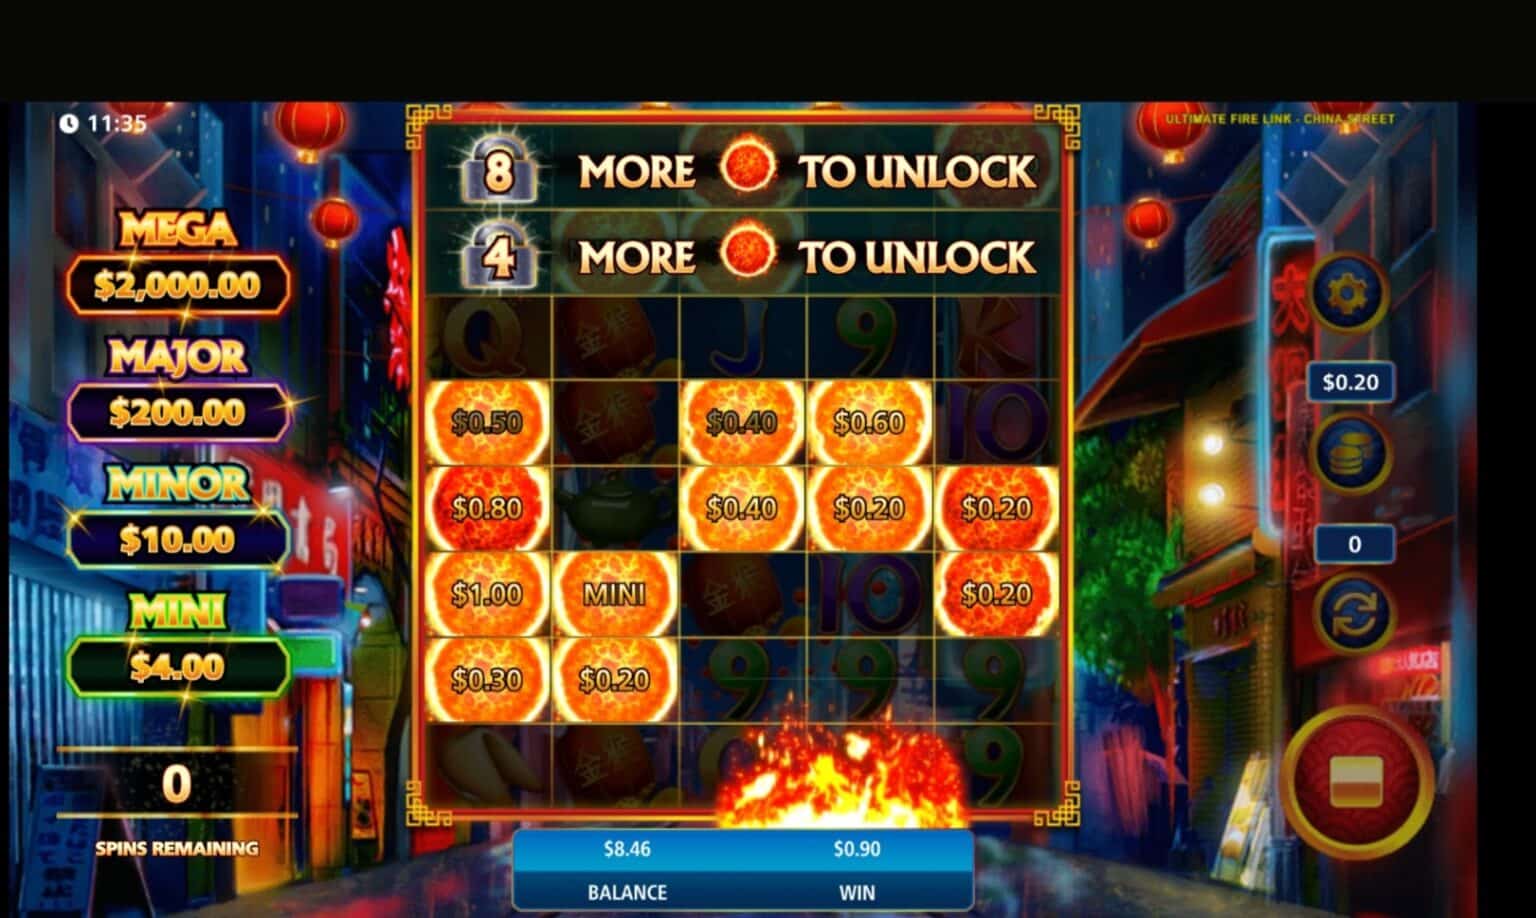 Slot Review: Ultimate Fire Link China Street At Caesars Online Casino